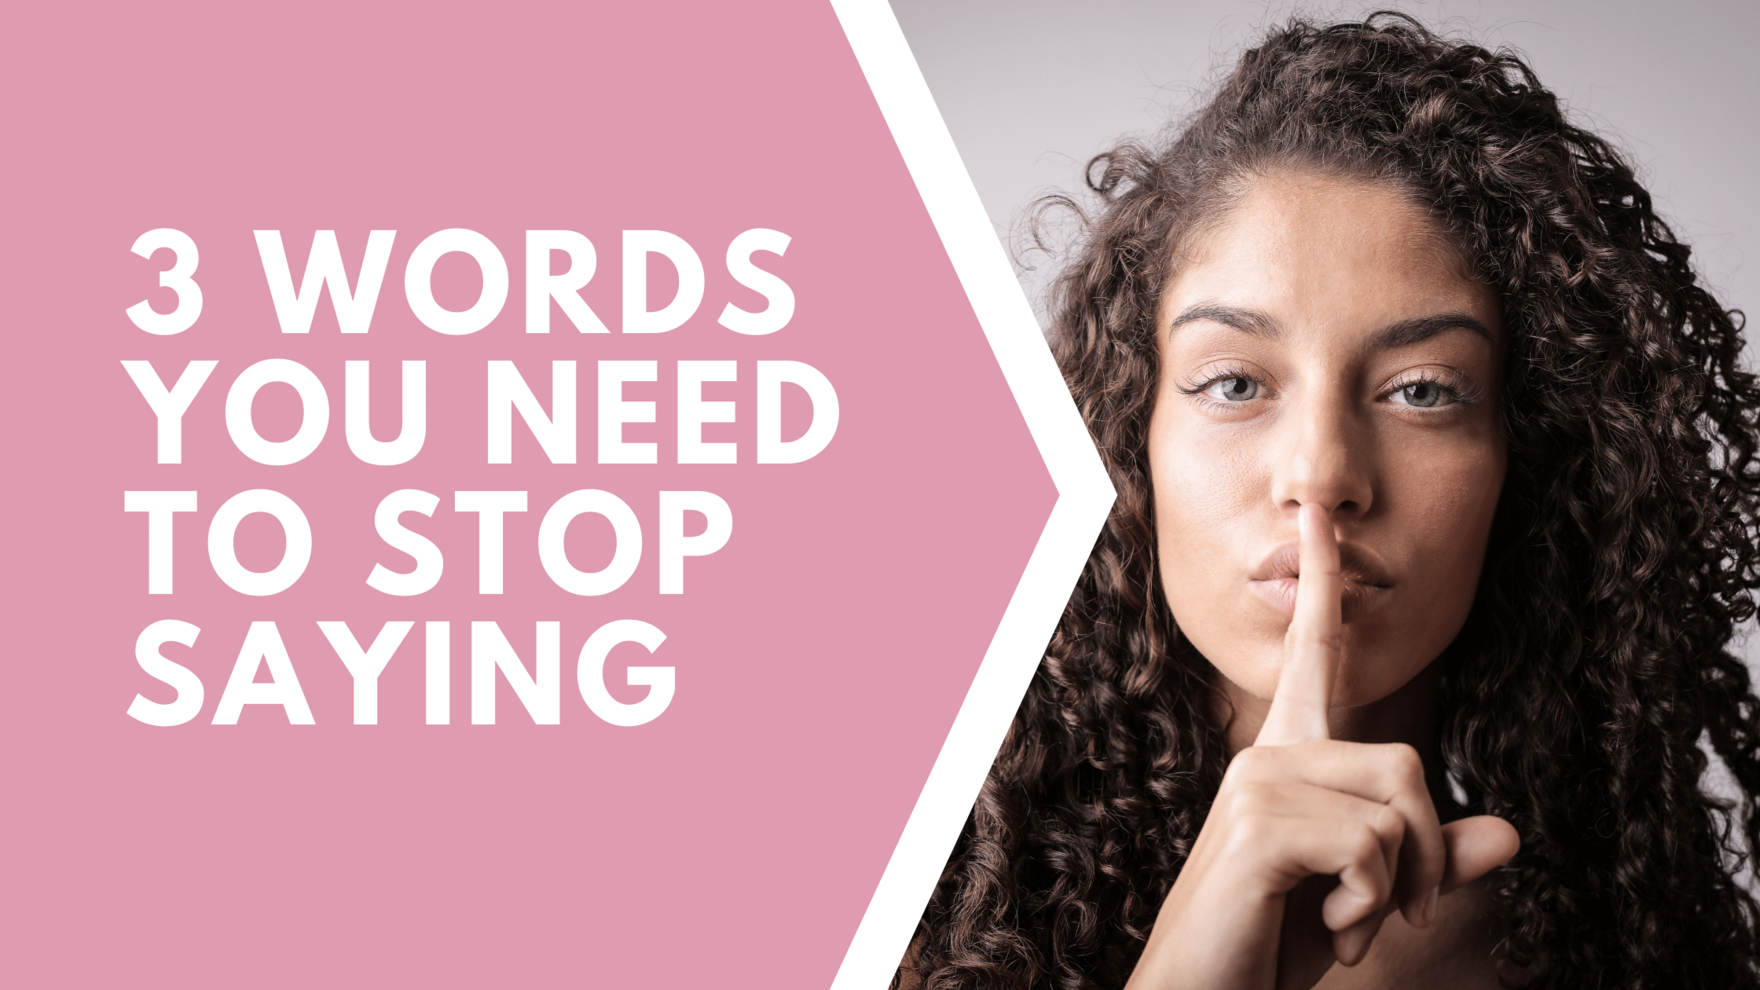 3 WORDS YOU NEED TO STOP SAYING (2)